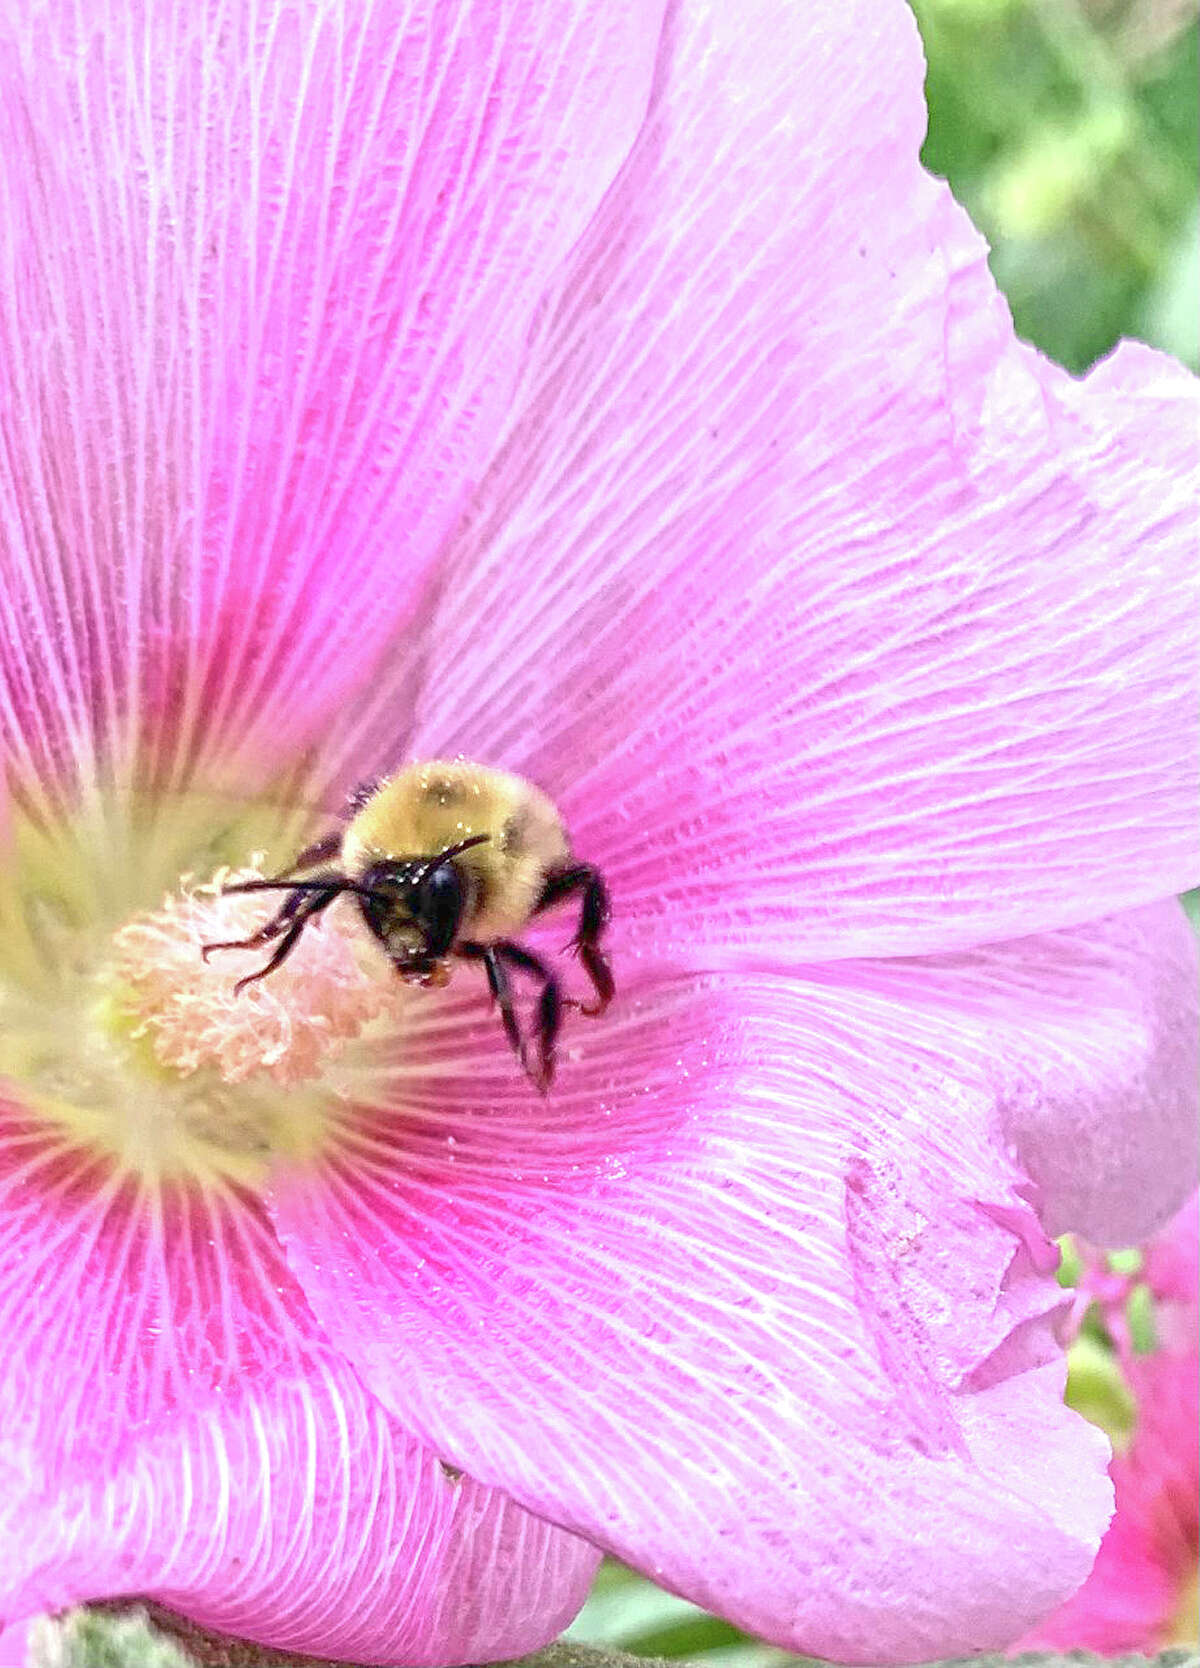 A bumblebee heads for home after dusting itself with pollen from a flower.